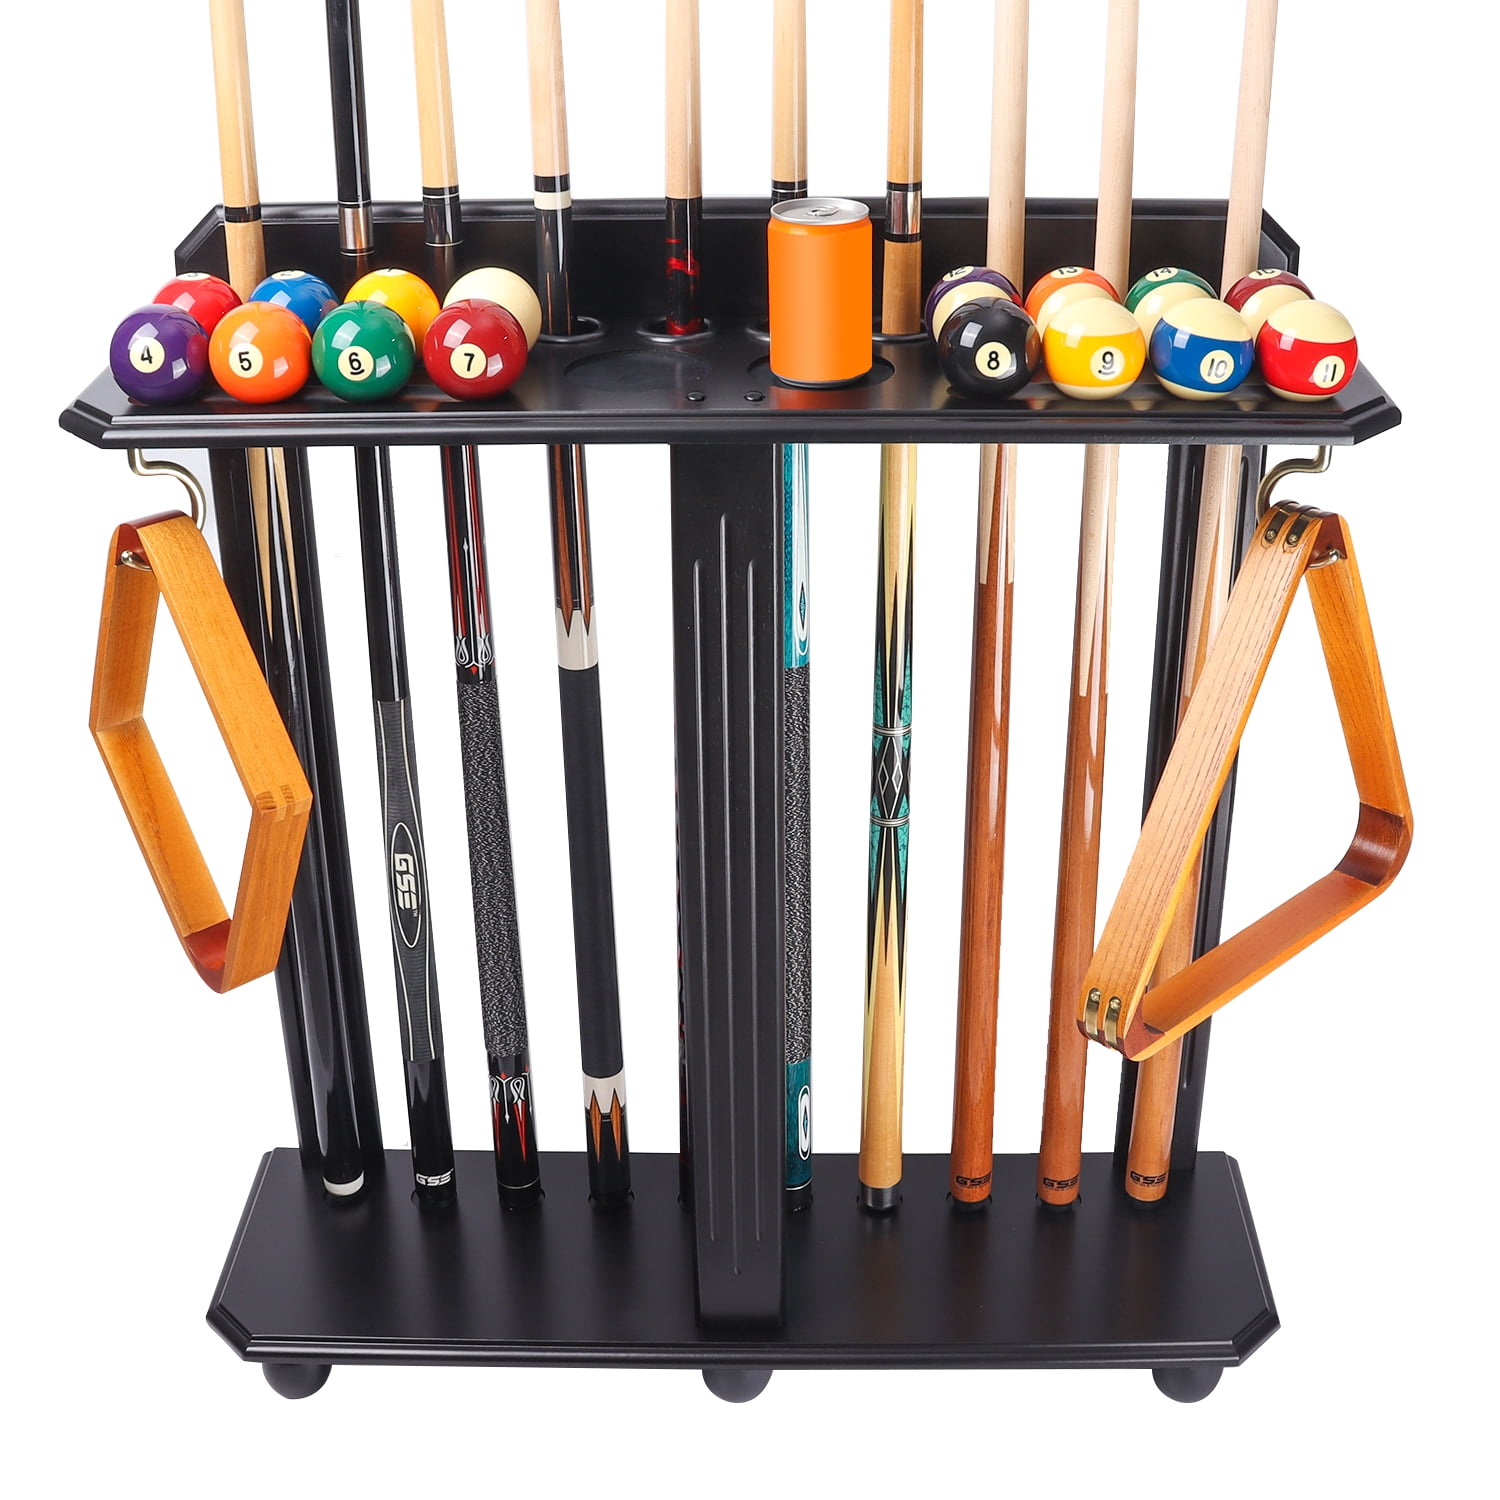 GSE Games & Sports Expert Corner-Style Floor Stand Billiard Pool Cue Racks with Score Counters Holds 8 Pool Cue Stick and Full Set of Pool Balls 